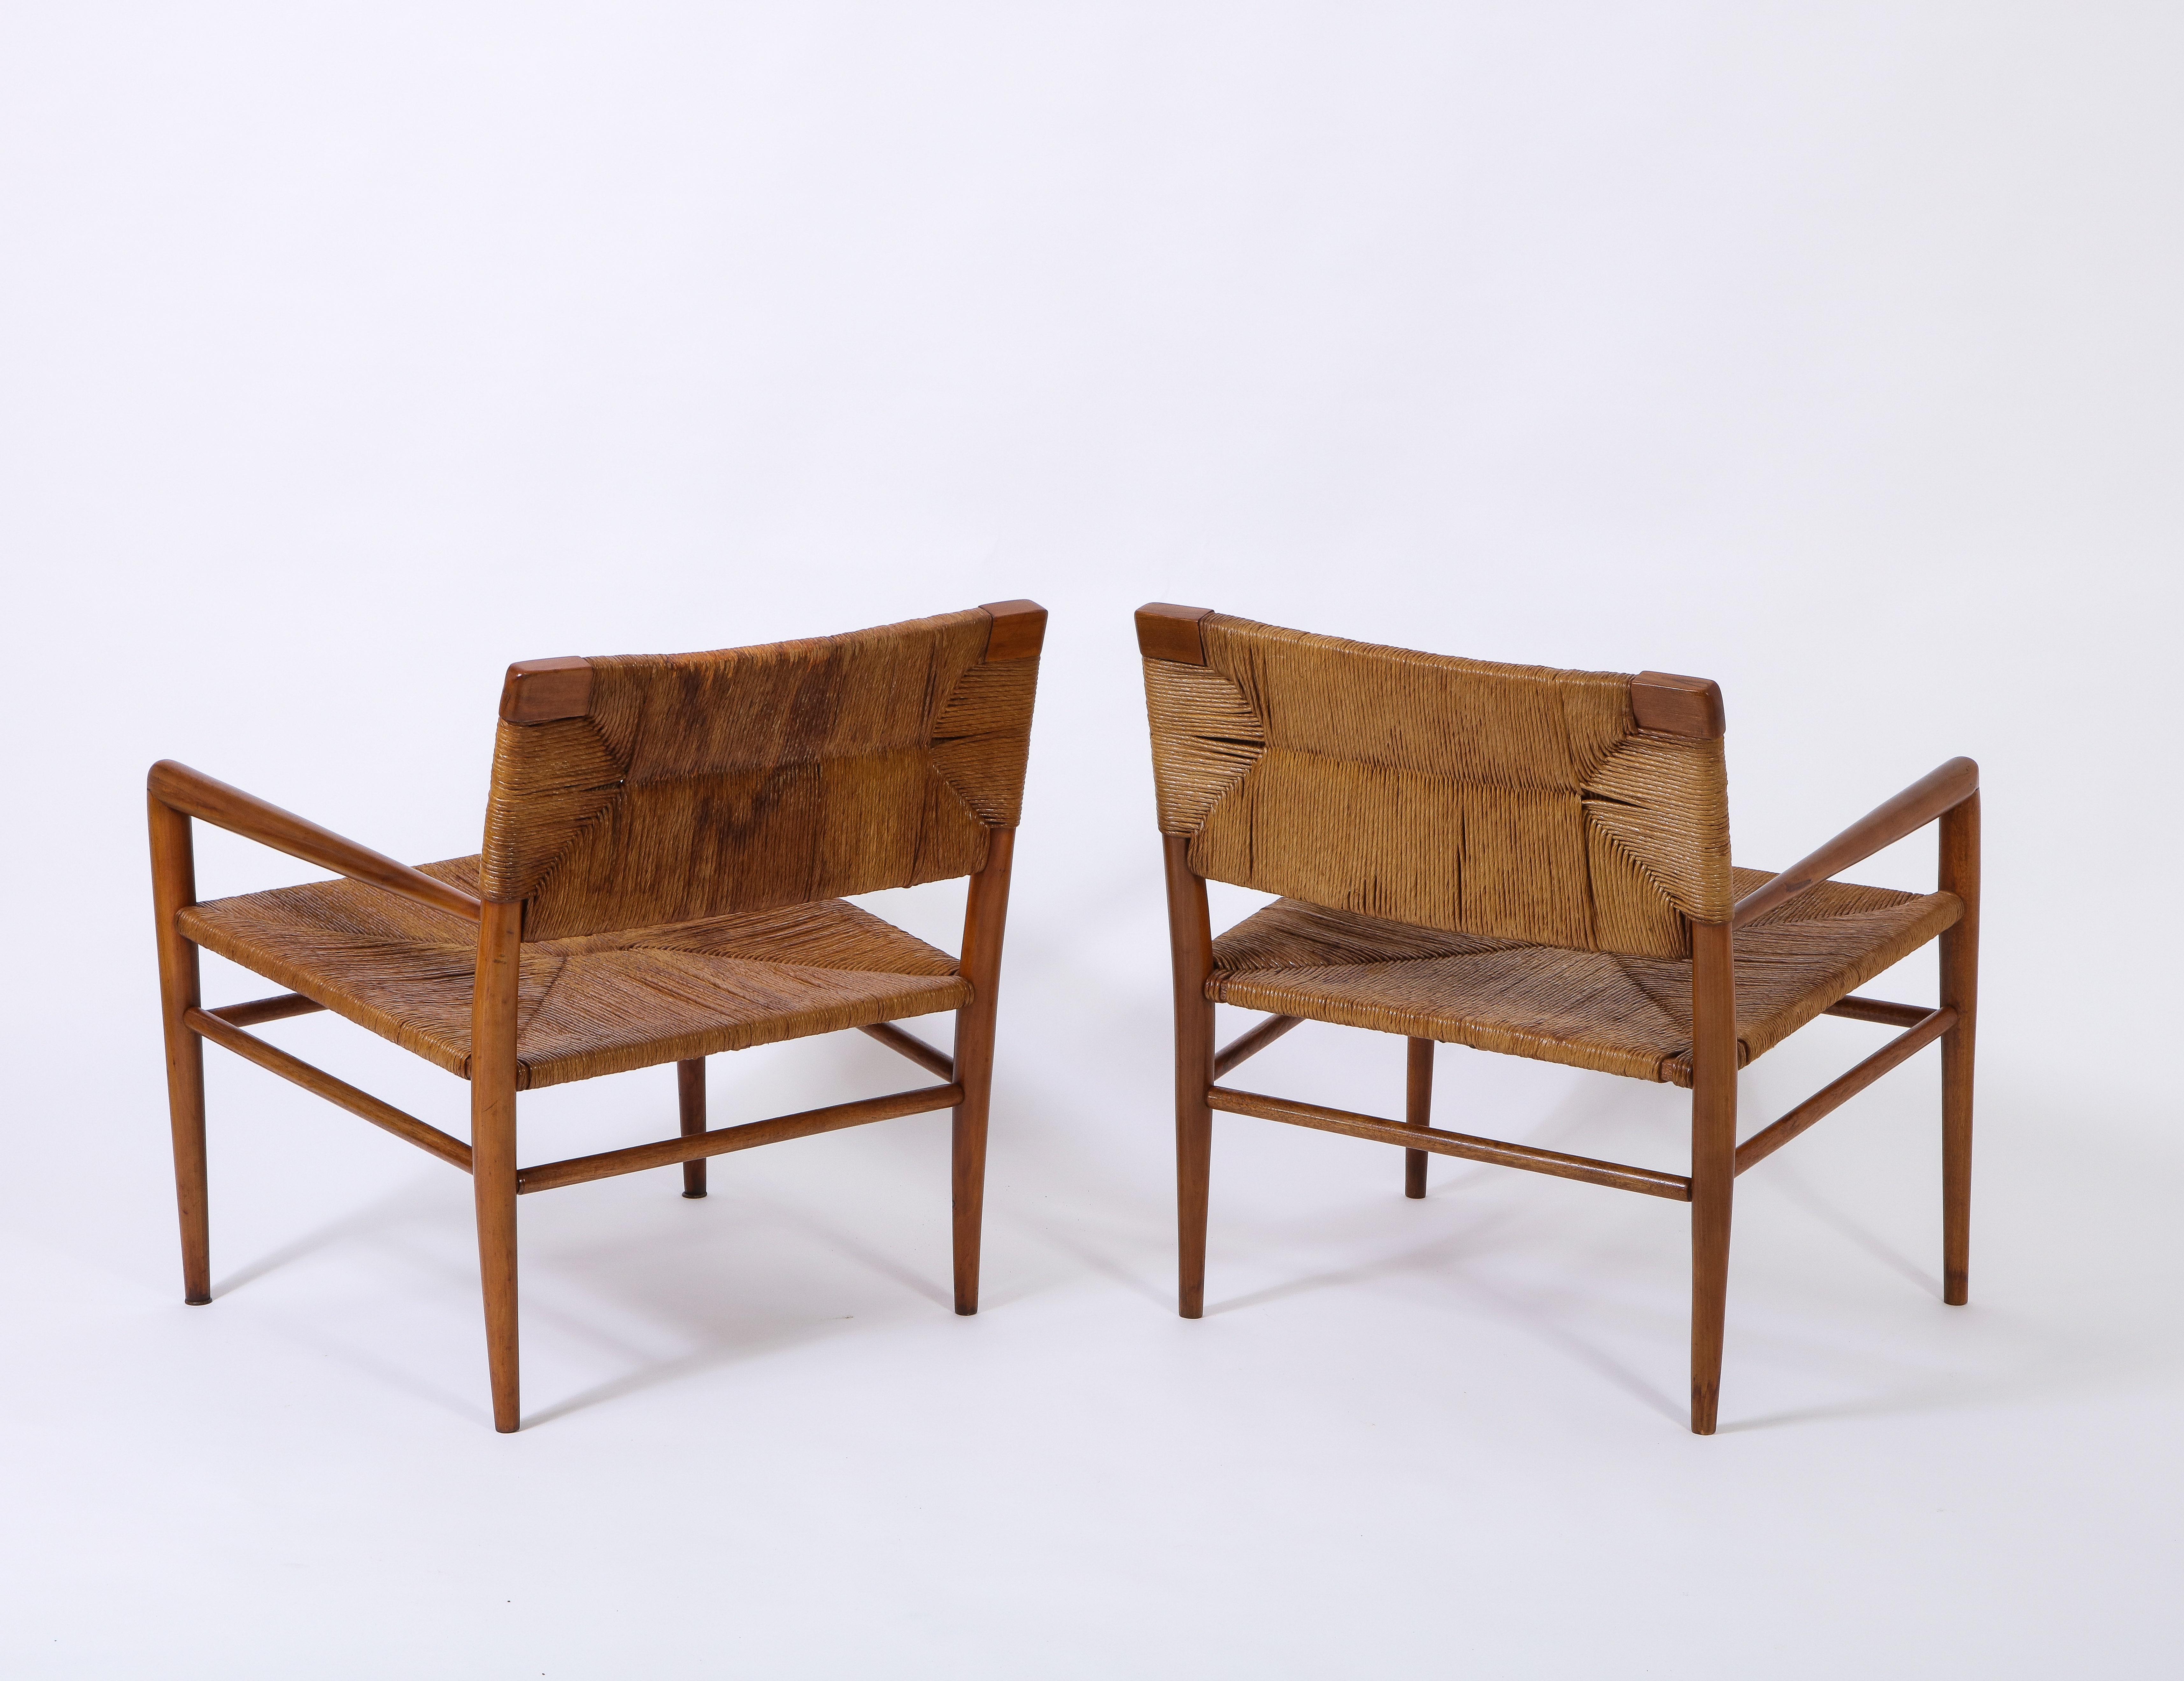 Pair of Vintage Oak and Rush Chairs by Mel Smilow, USA, 1960 For Sale 1